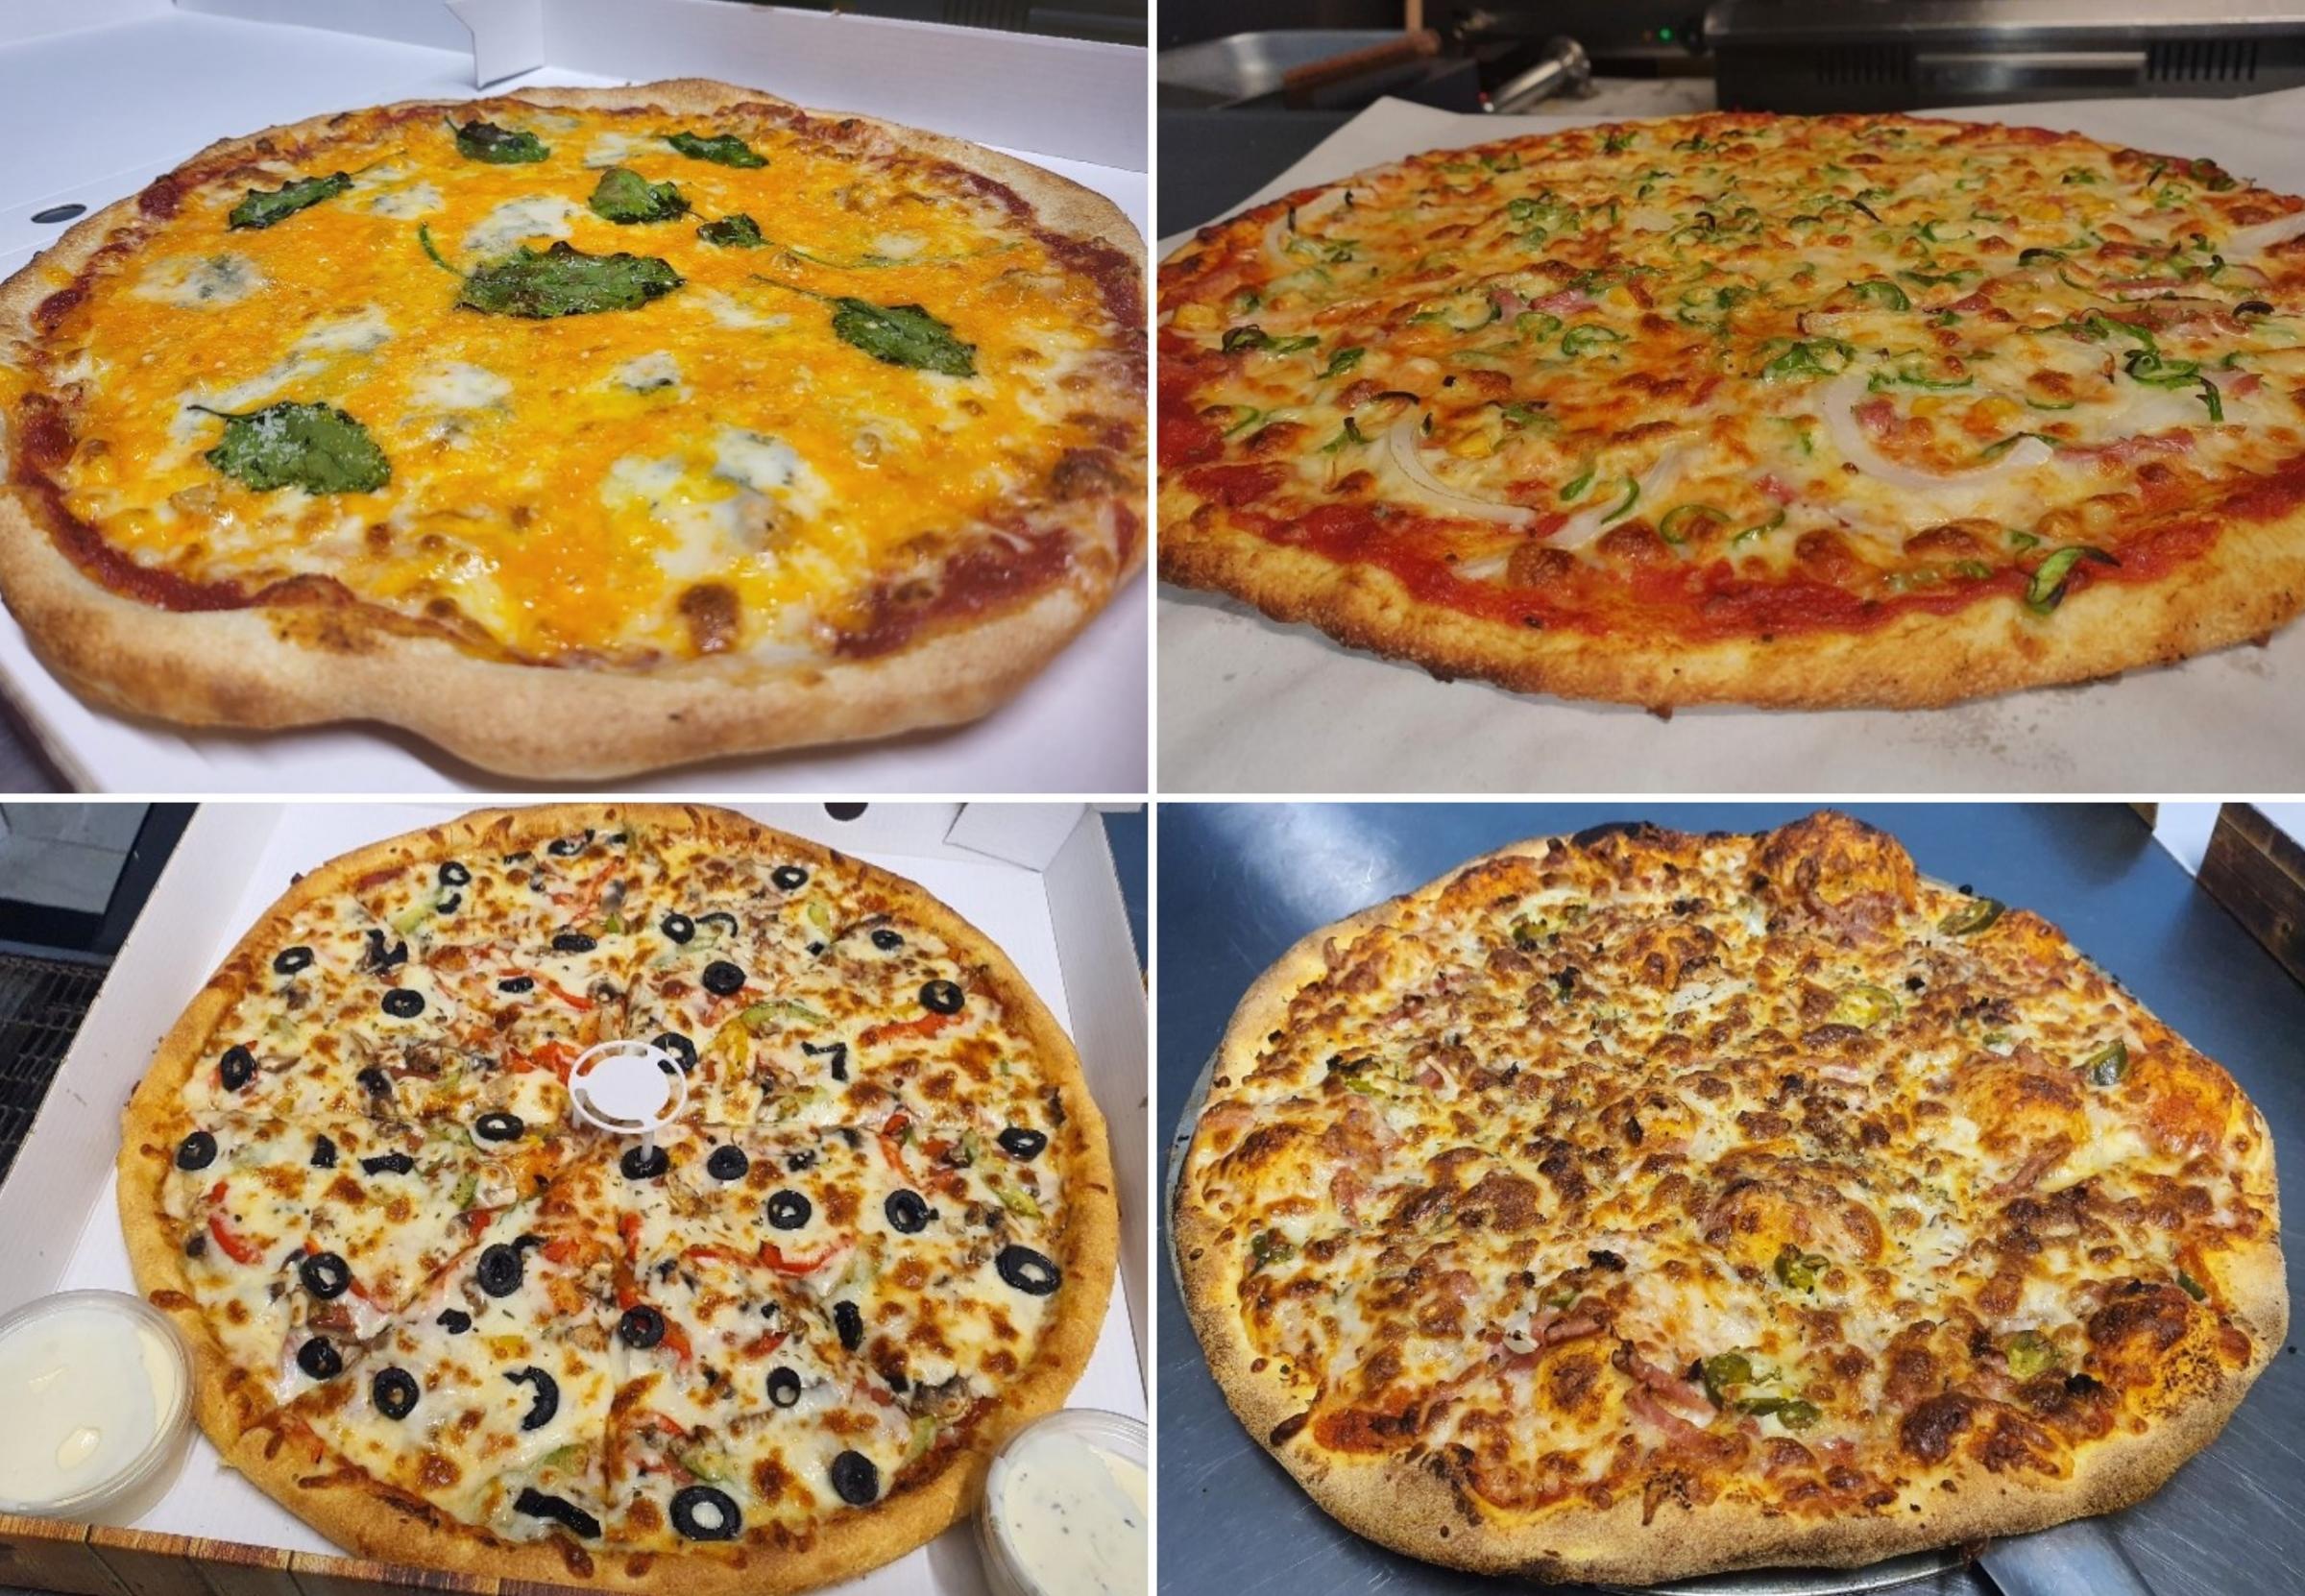 Some of the award-winning pizzas on offer at Pizza Mamma